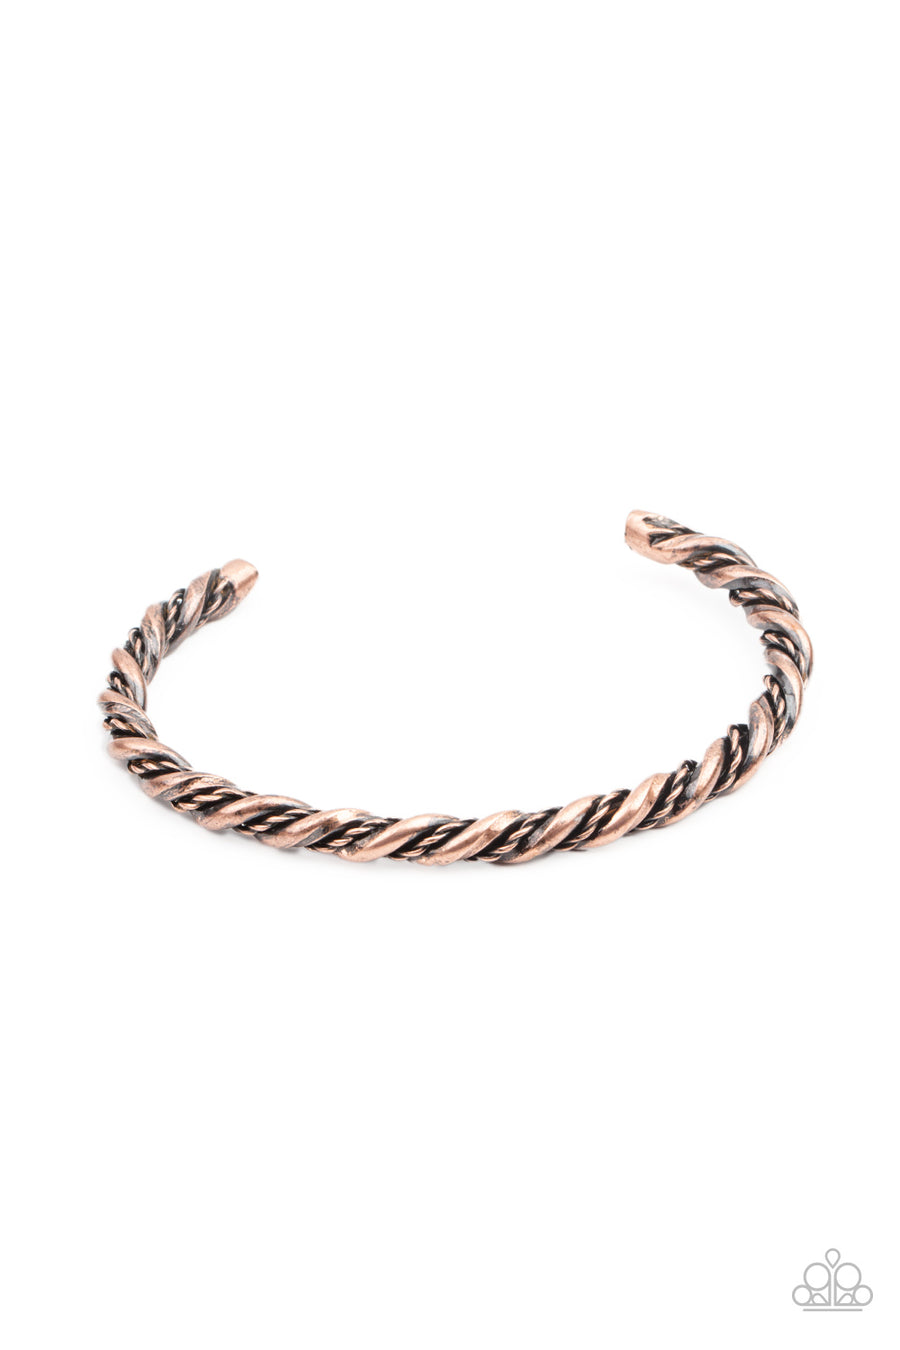 Combat Ready - Copper Mens Bracelet - Paparazzi Accessories - Mismatched antiqued copper bars twist around the wrist, creating an edgy cuff. Sold as one individual bracelet.